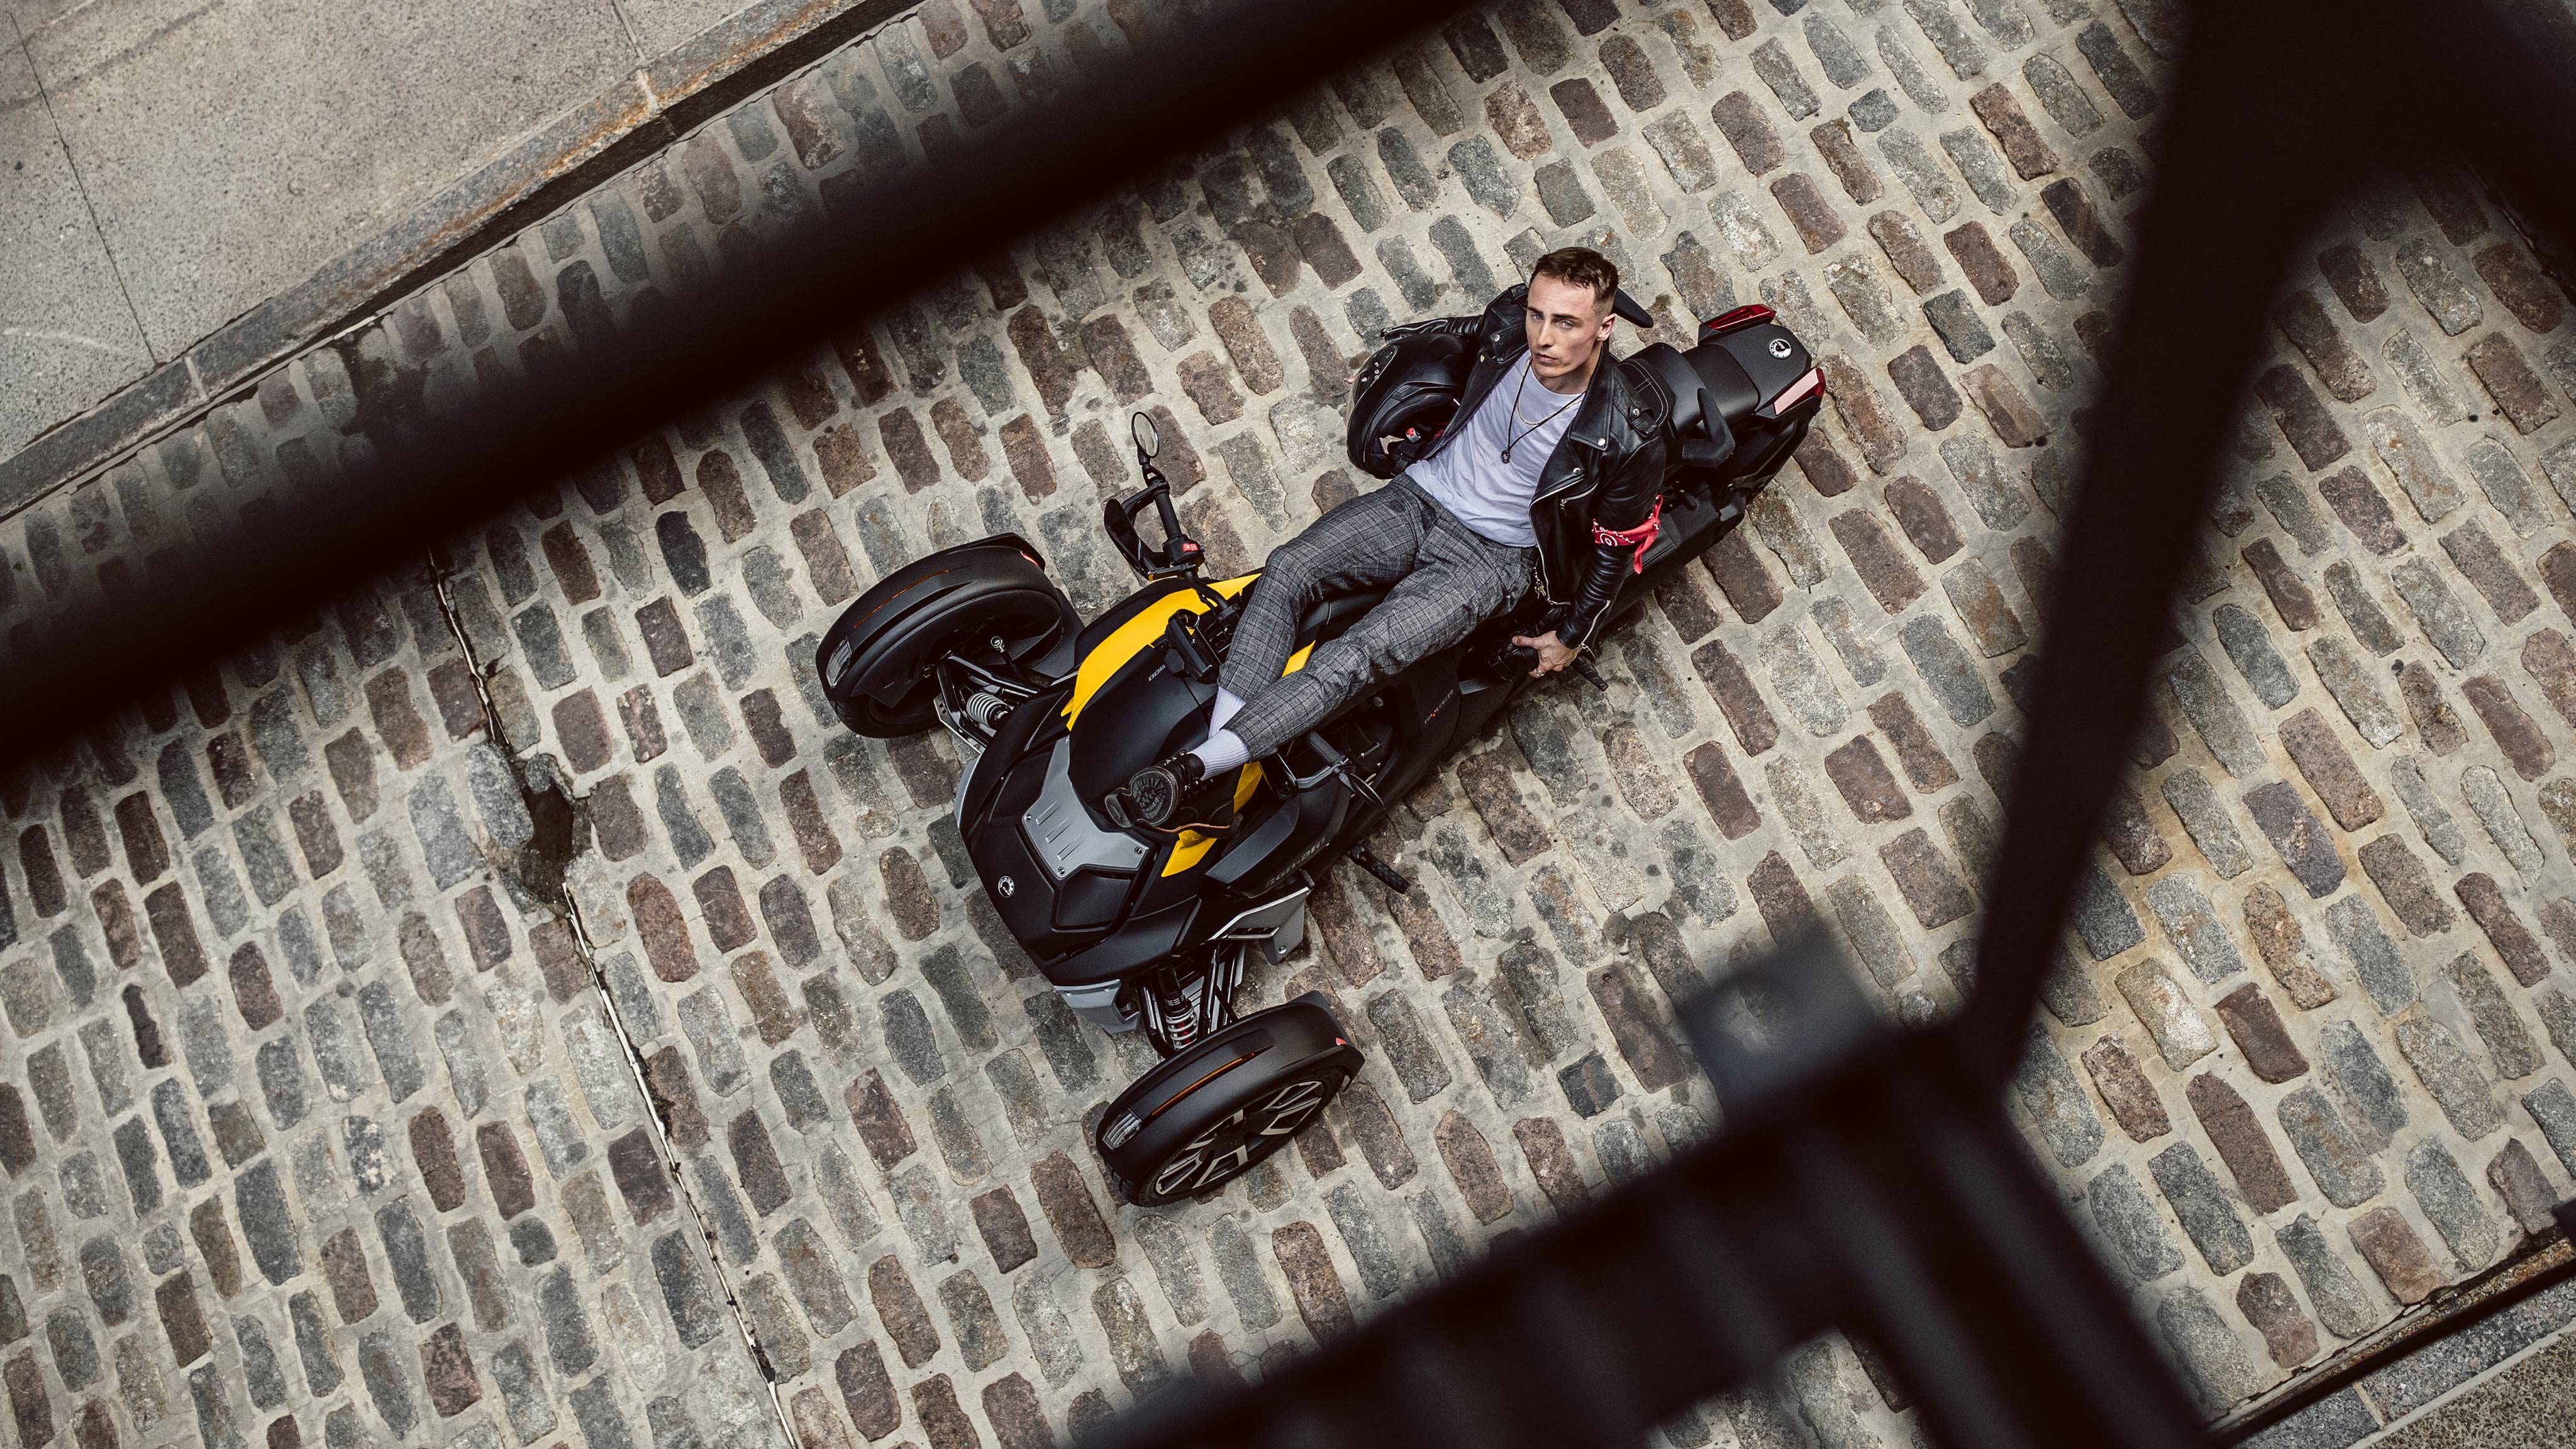 A man reclining on his Can-Am vehicle, which is parked in a cobblestone alleyway